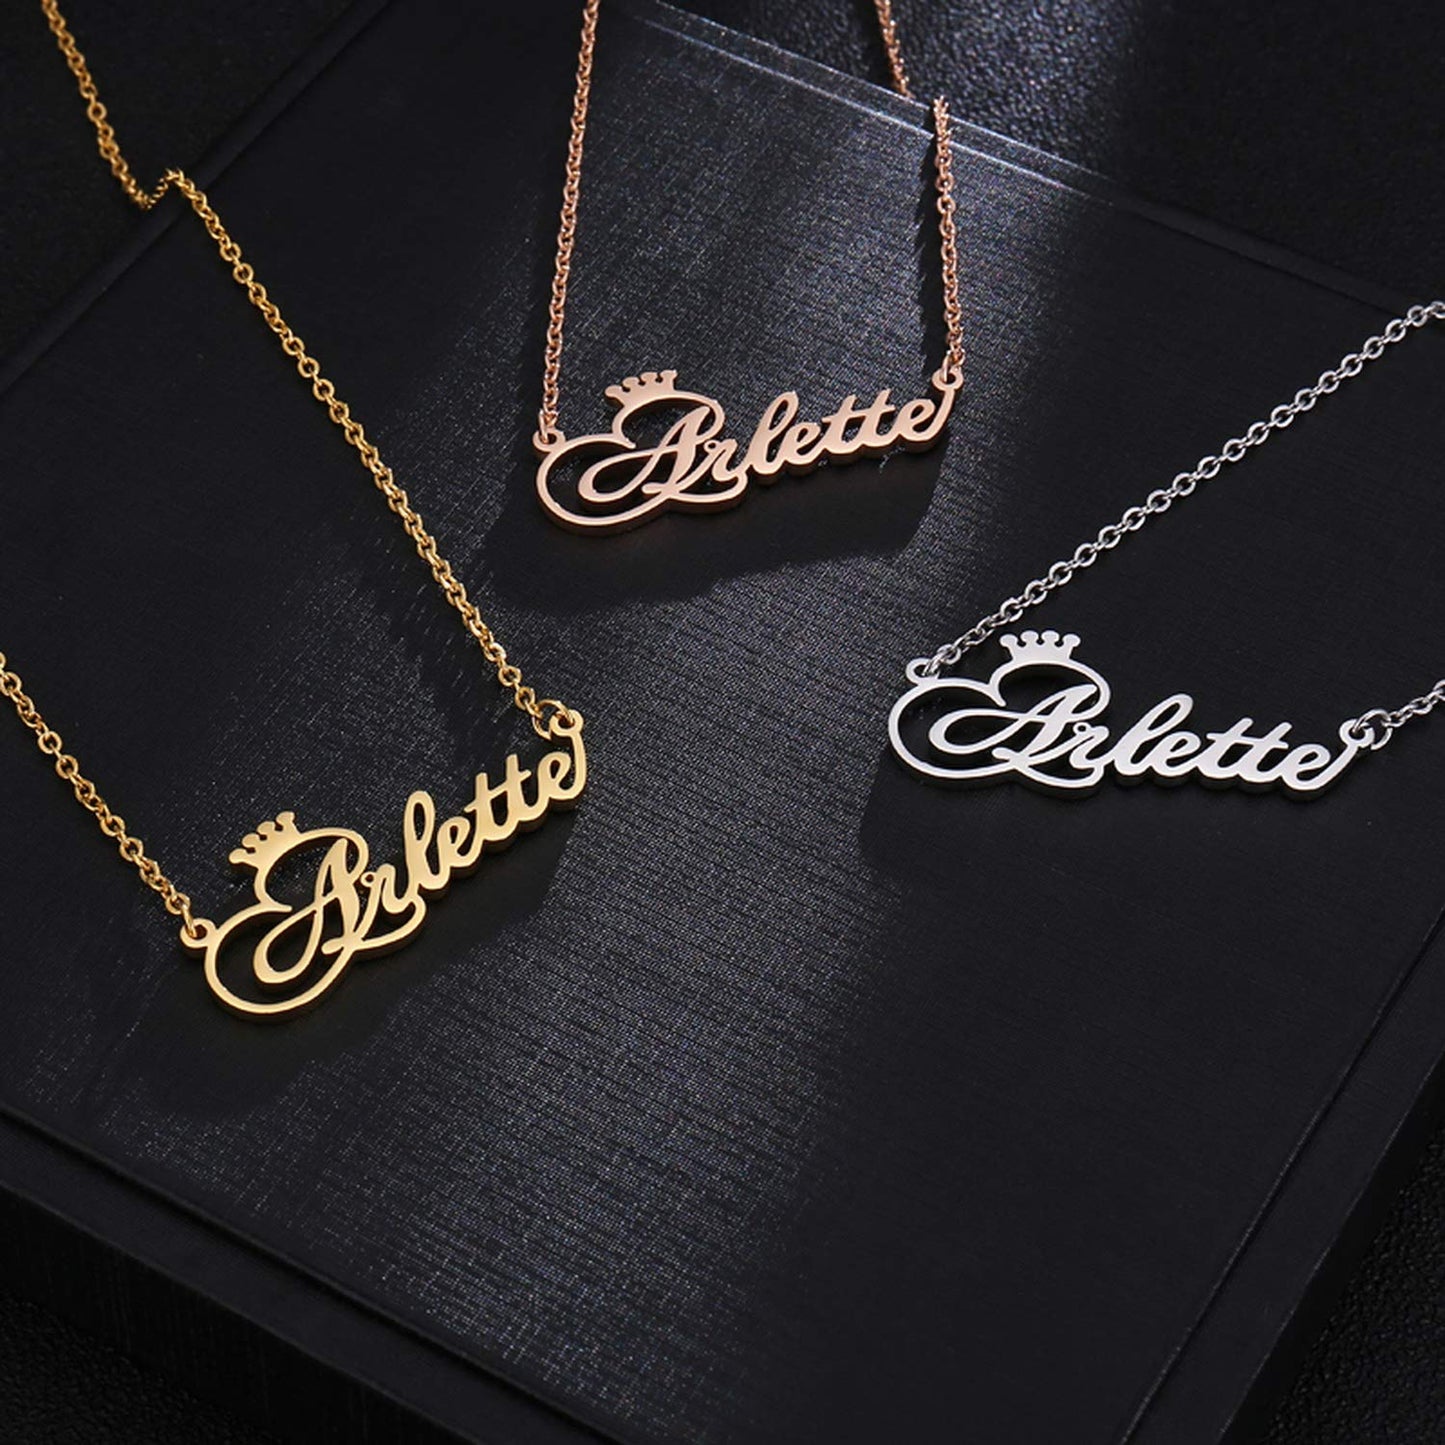 THE CHOPIN SCRIPT NAMEPLATE NECKLACE